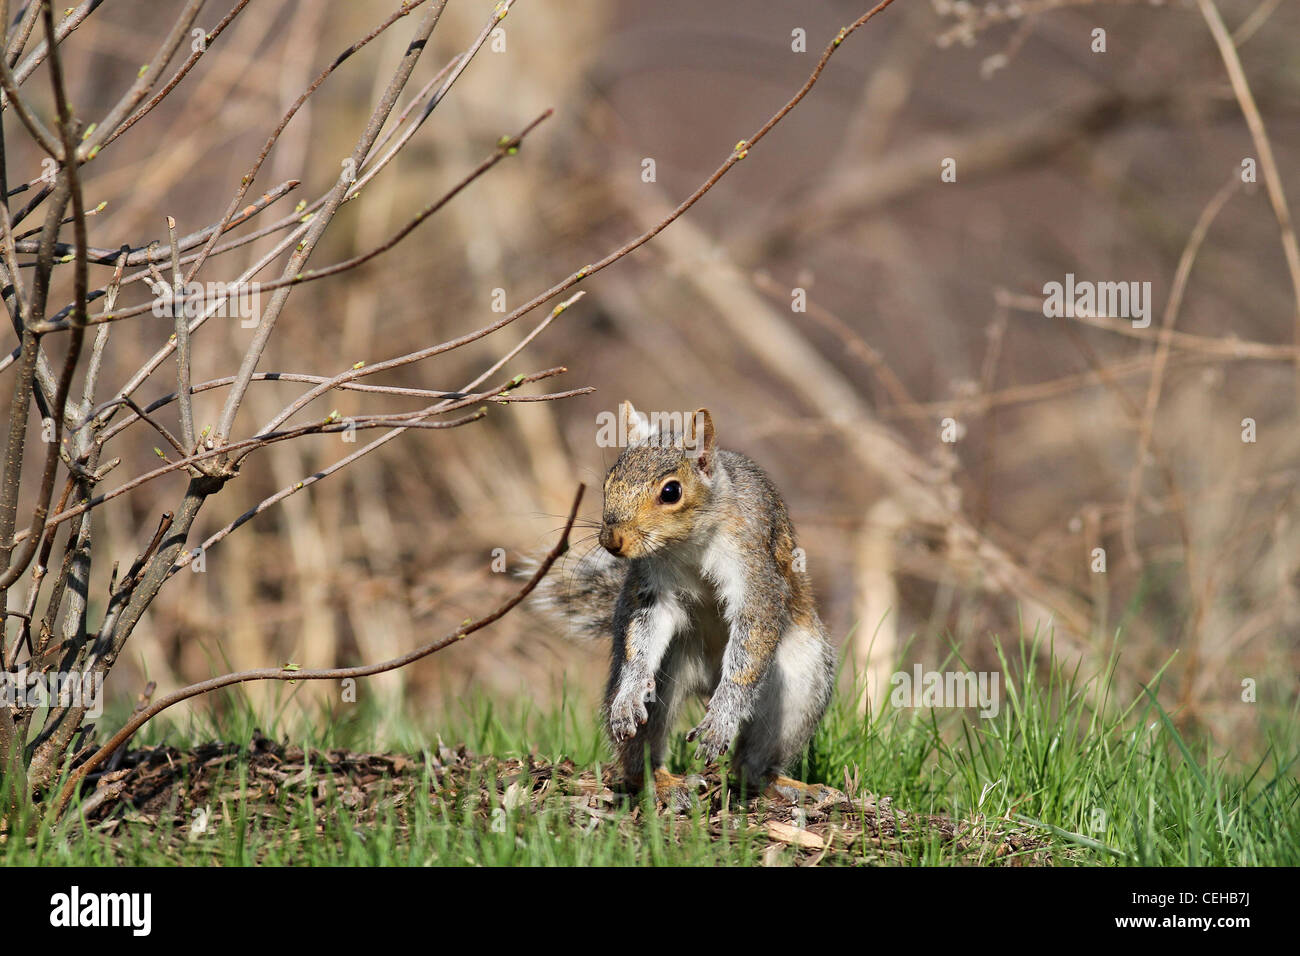 Eastern Gray Squirrel leaping Stock Photo